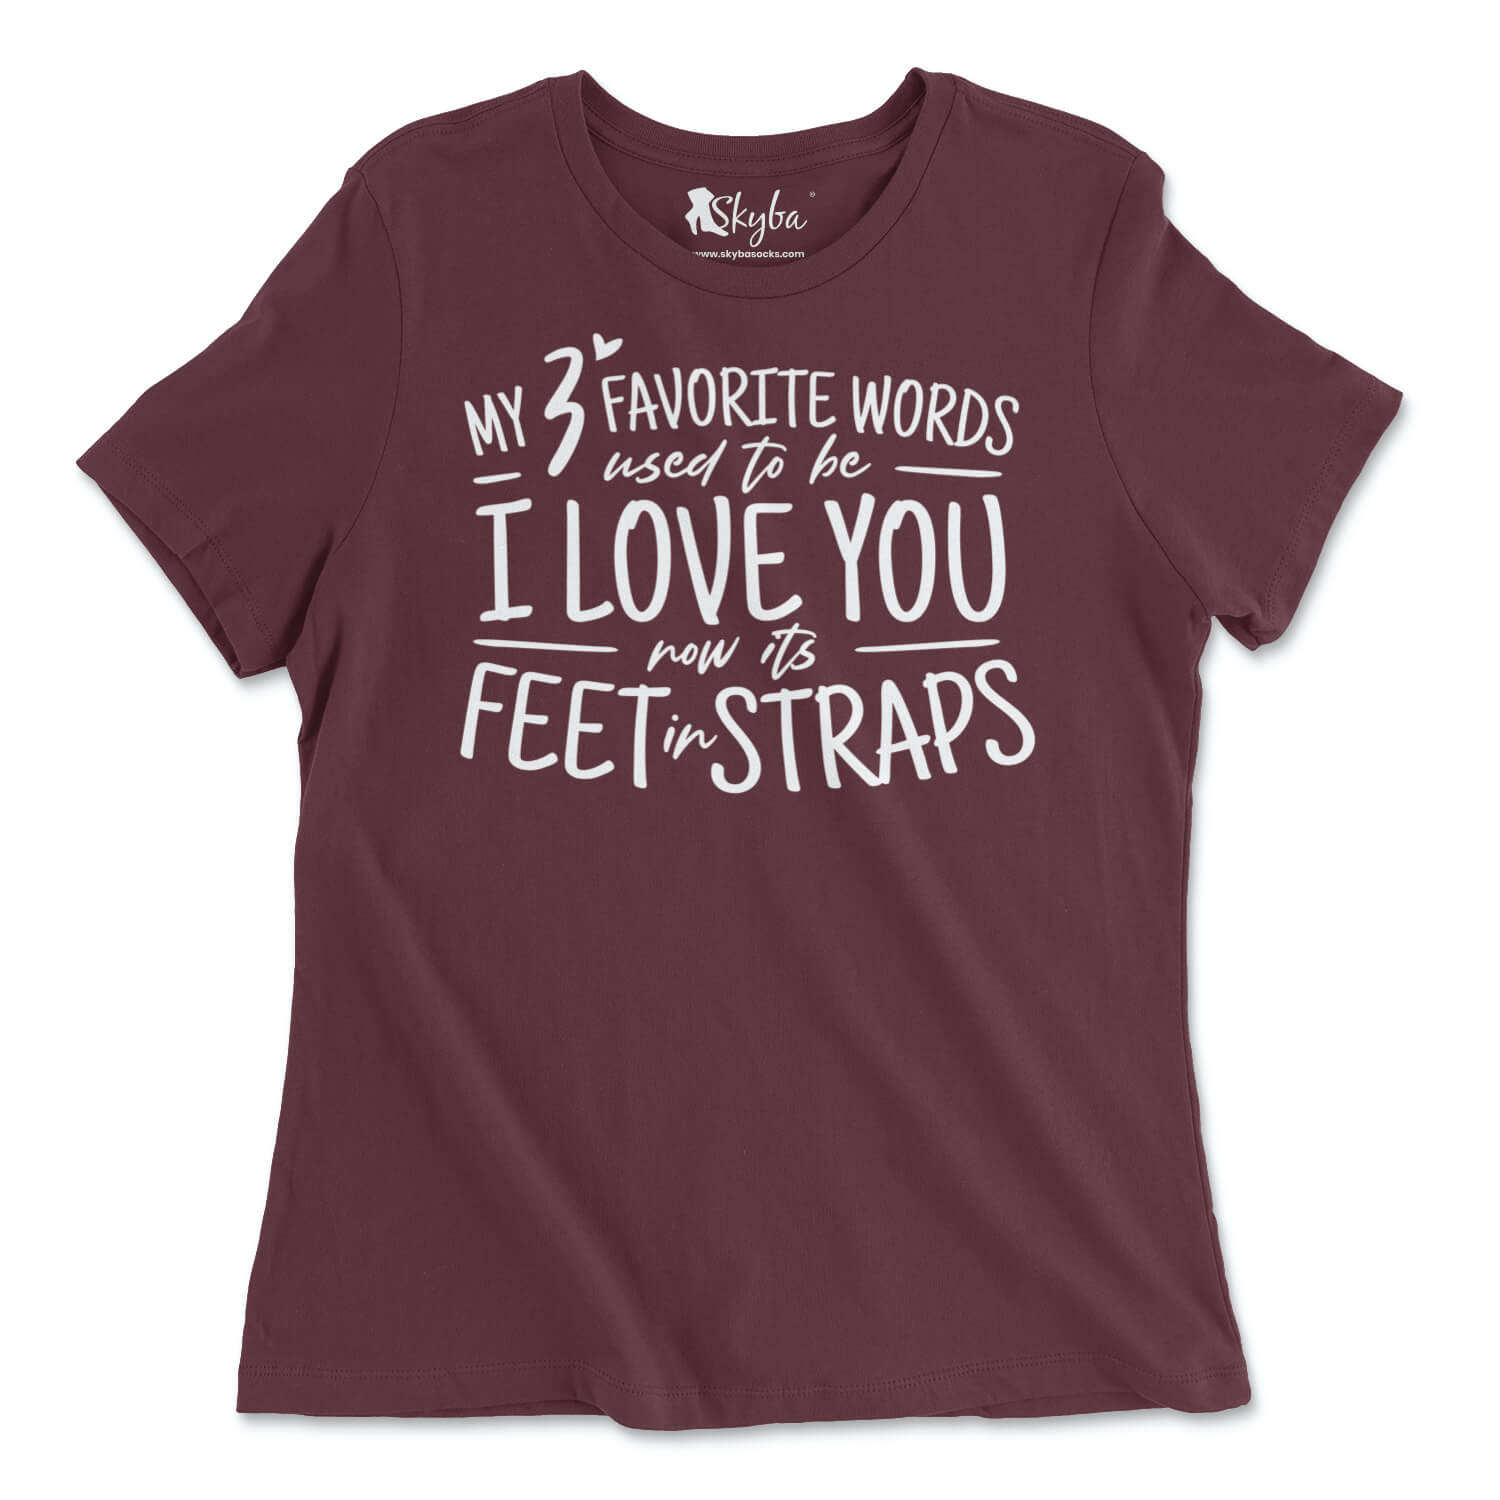 My 3 Favorite Words Used To Be I Love You Now It's Feet in Straps - Classic Tee Skyba T-Shirt